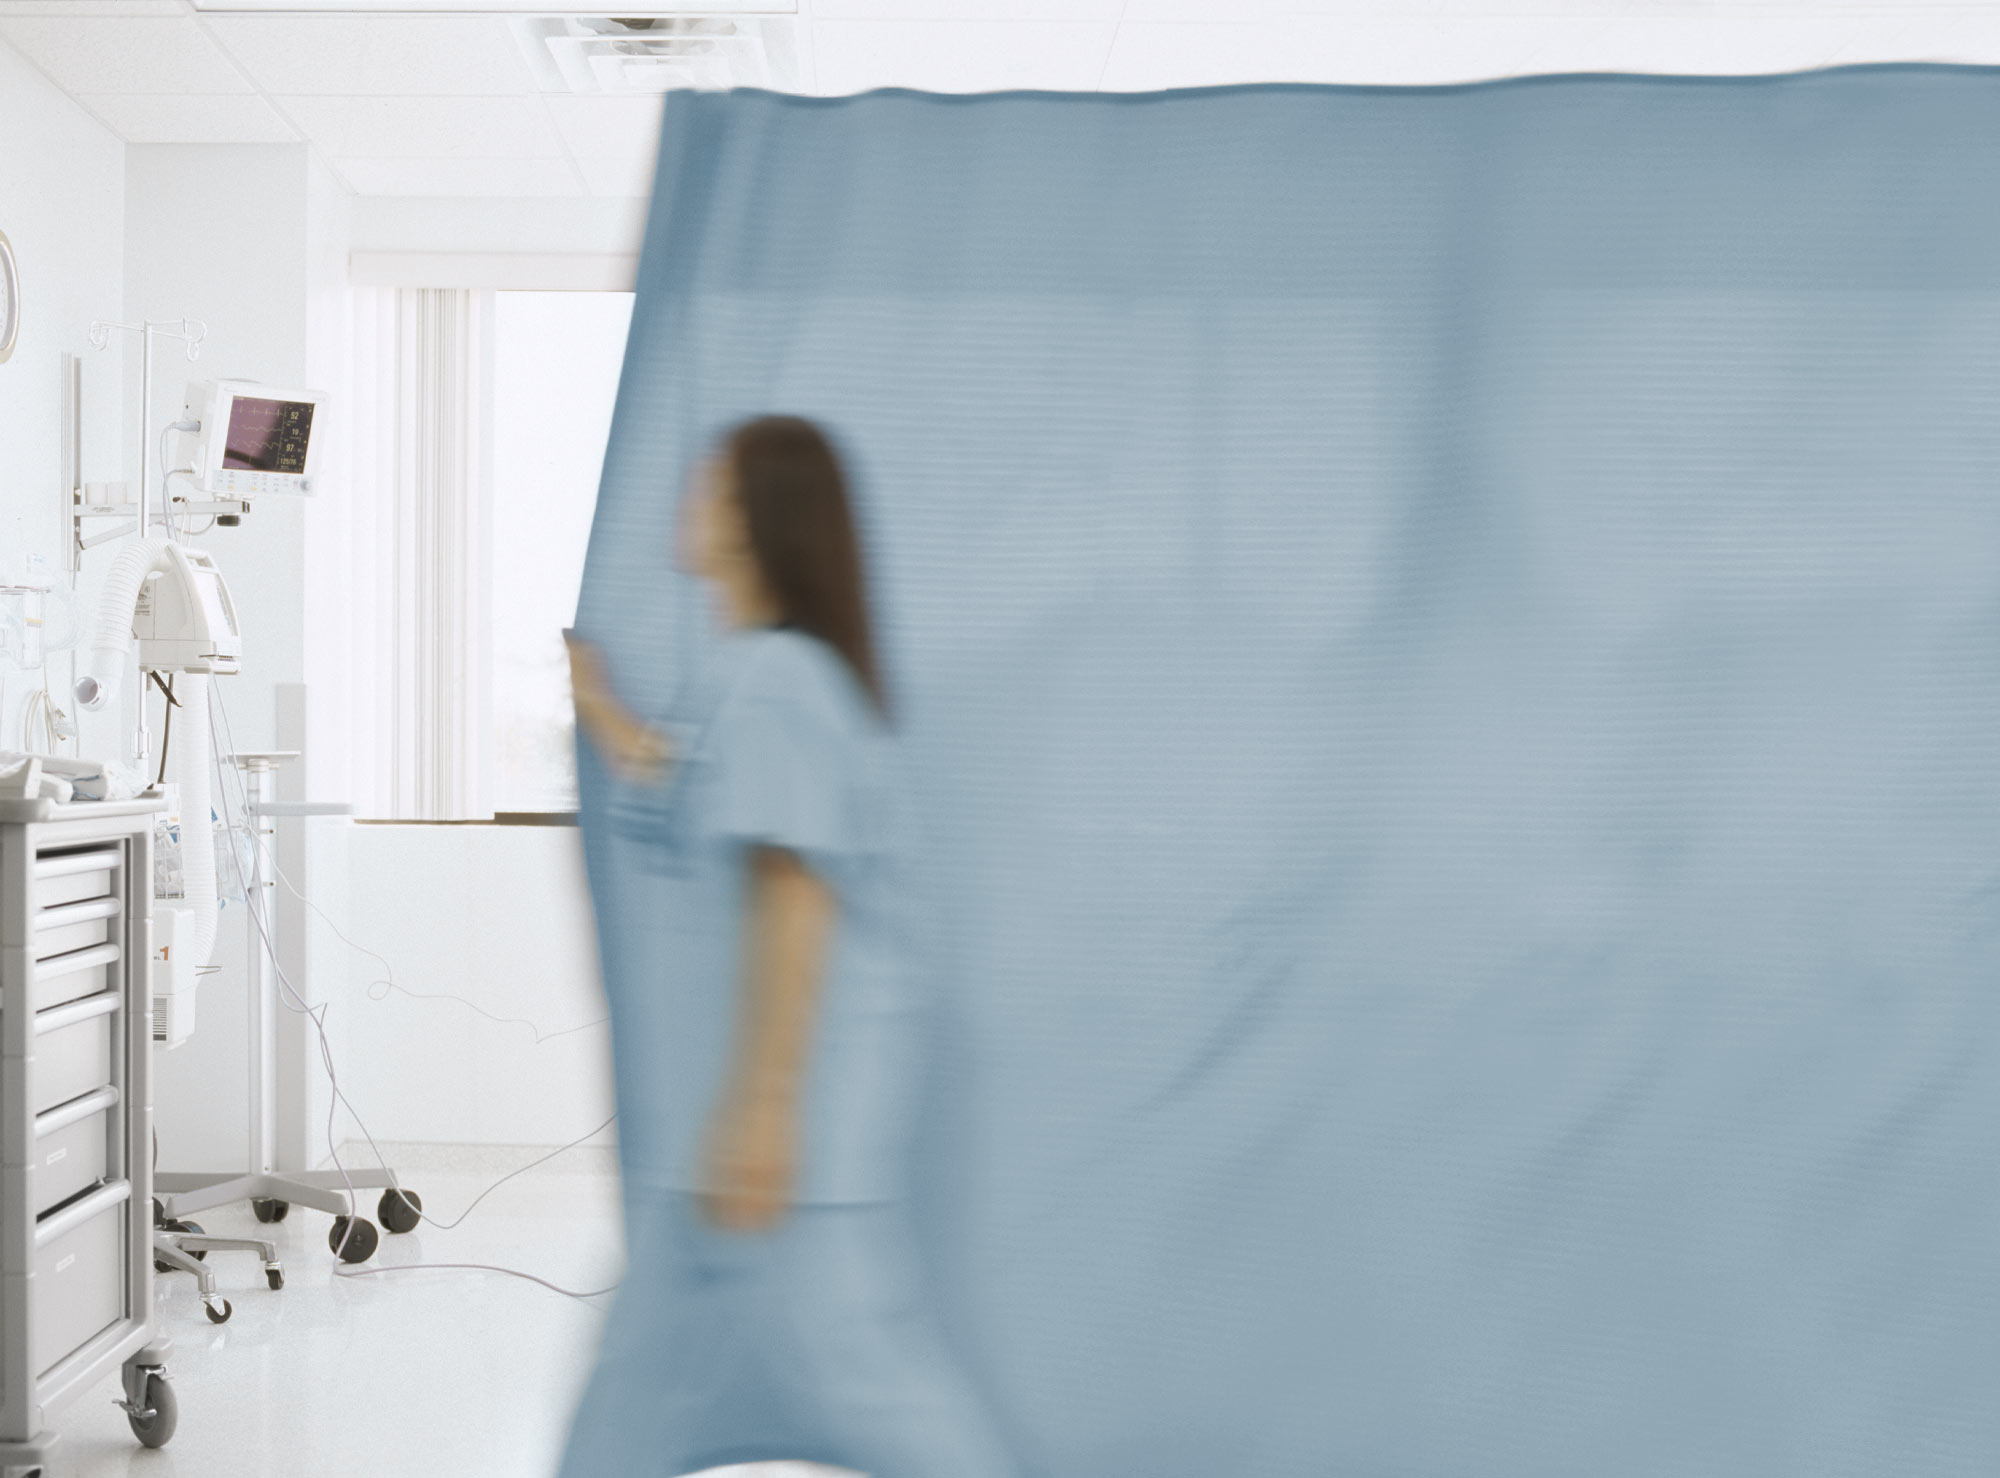 Hospital curtains – do you dare touch them?